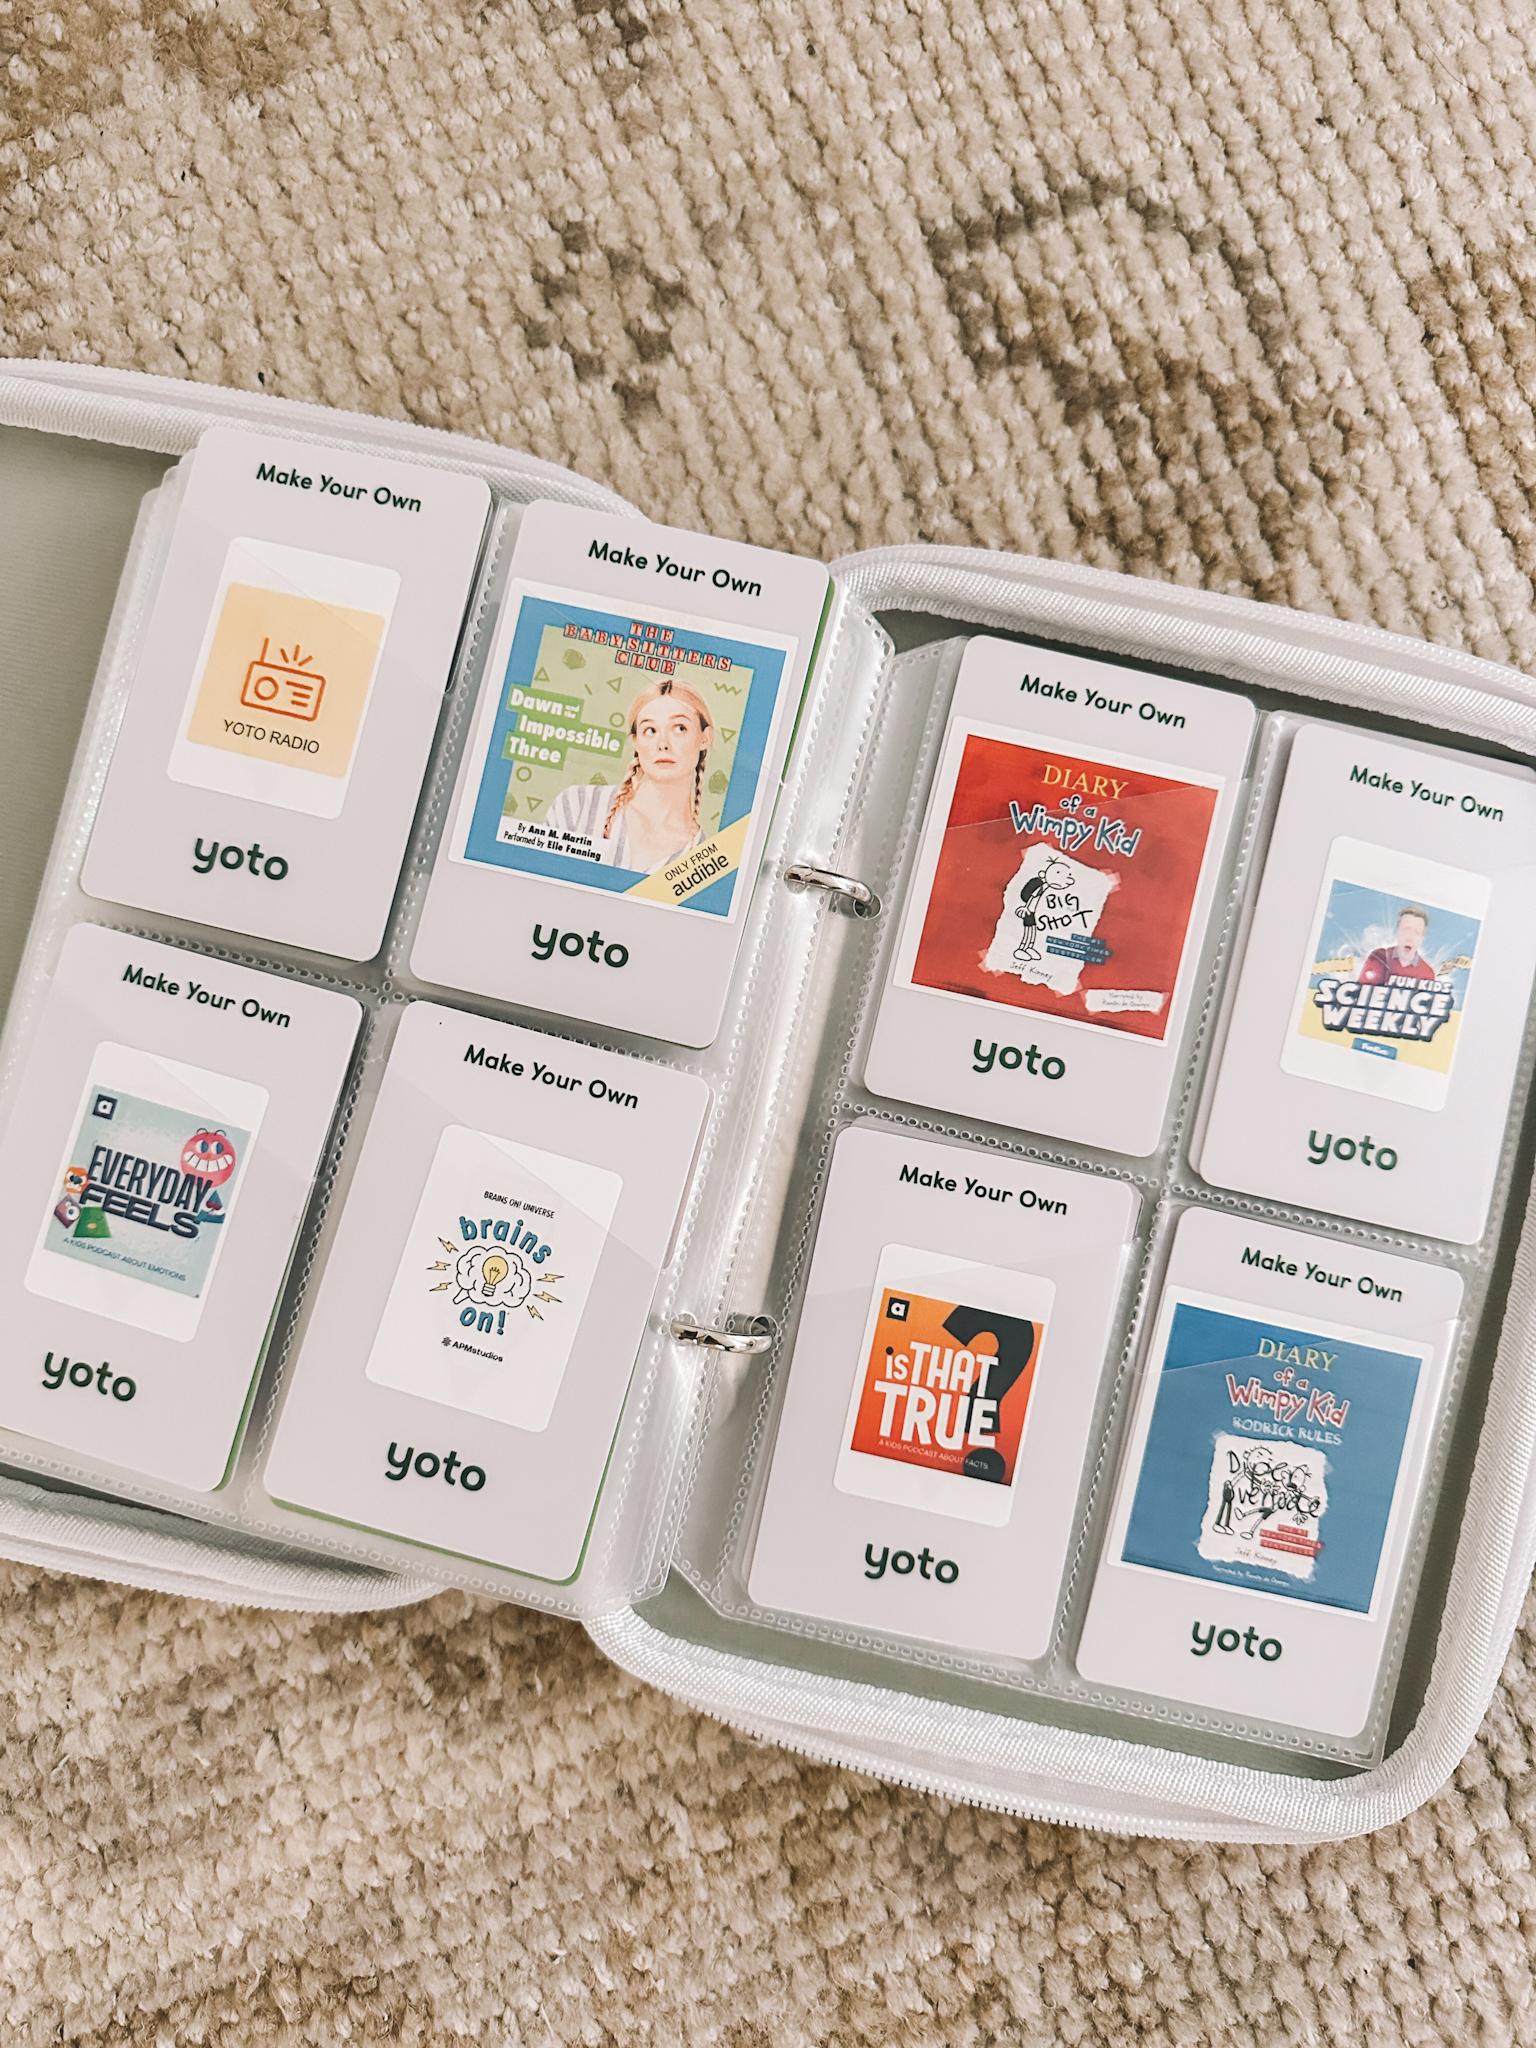 Yoto Player Review featuring Make-Your-Own Yoto Cards in Yoto Card Case